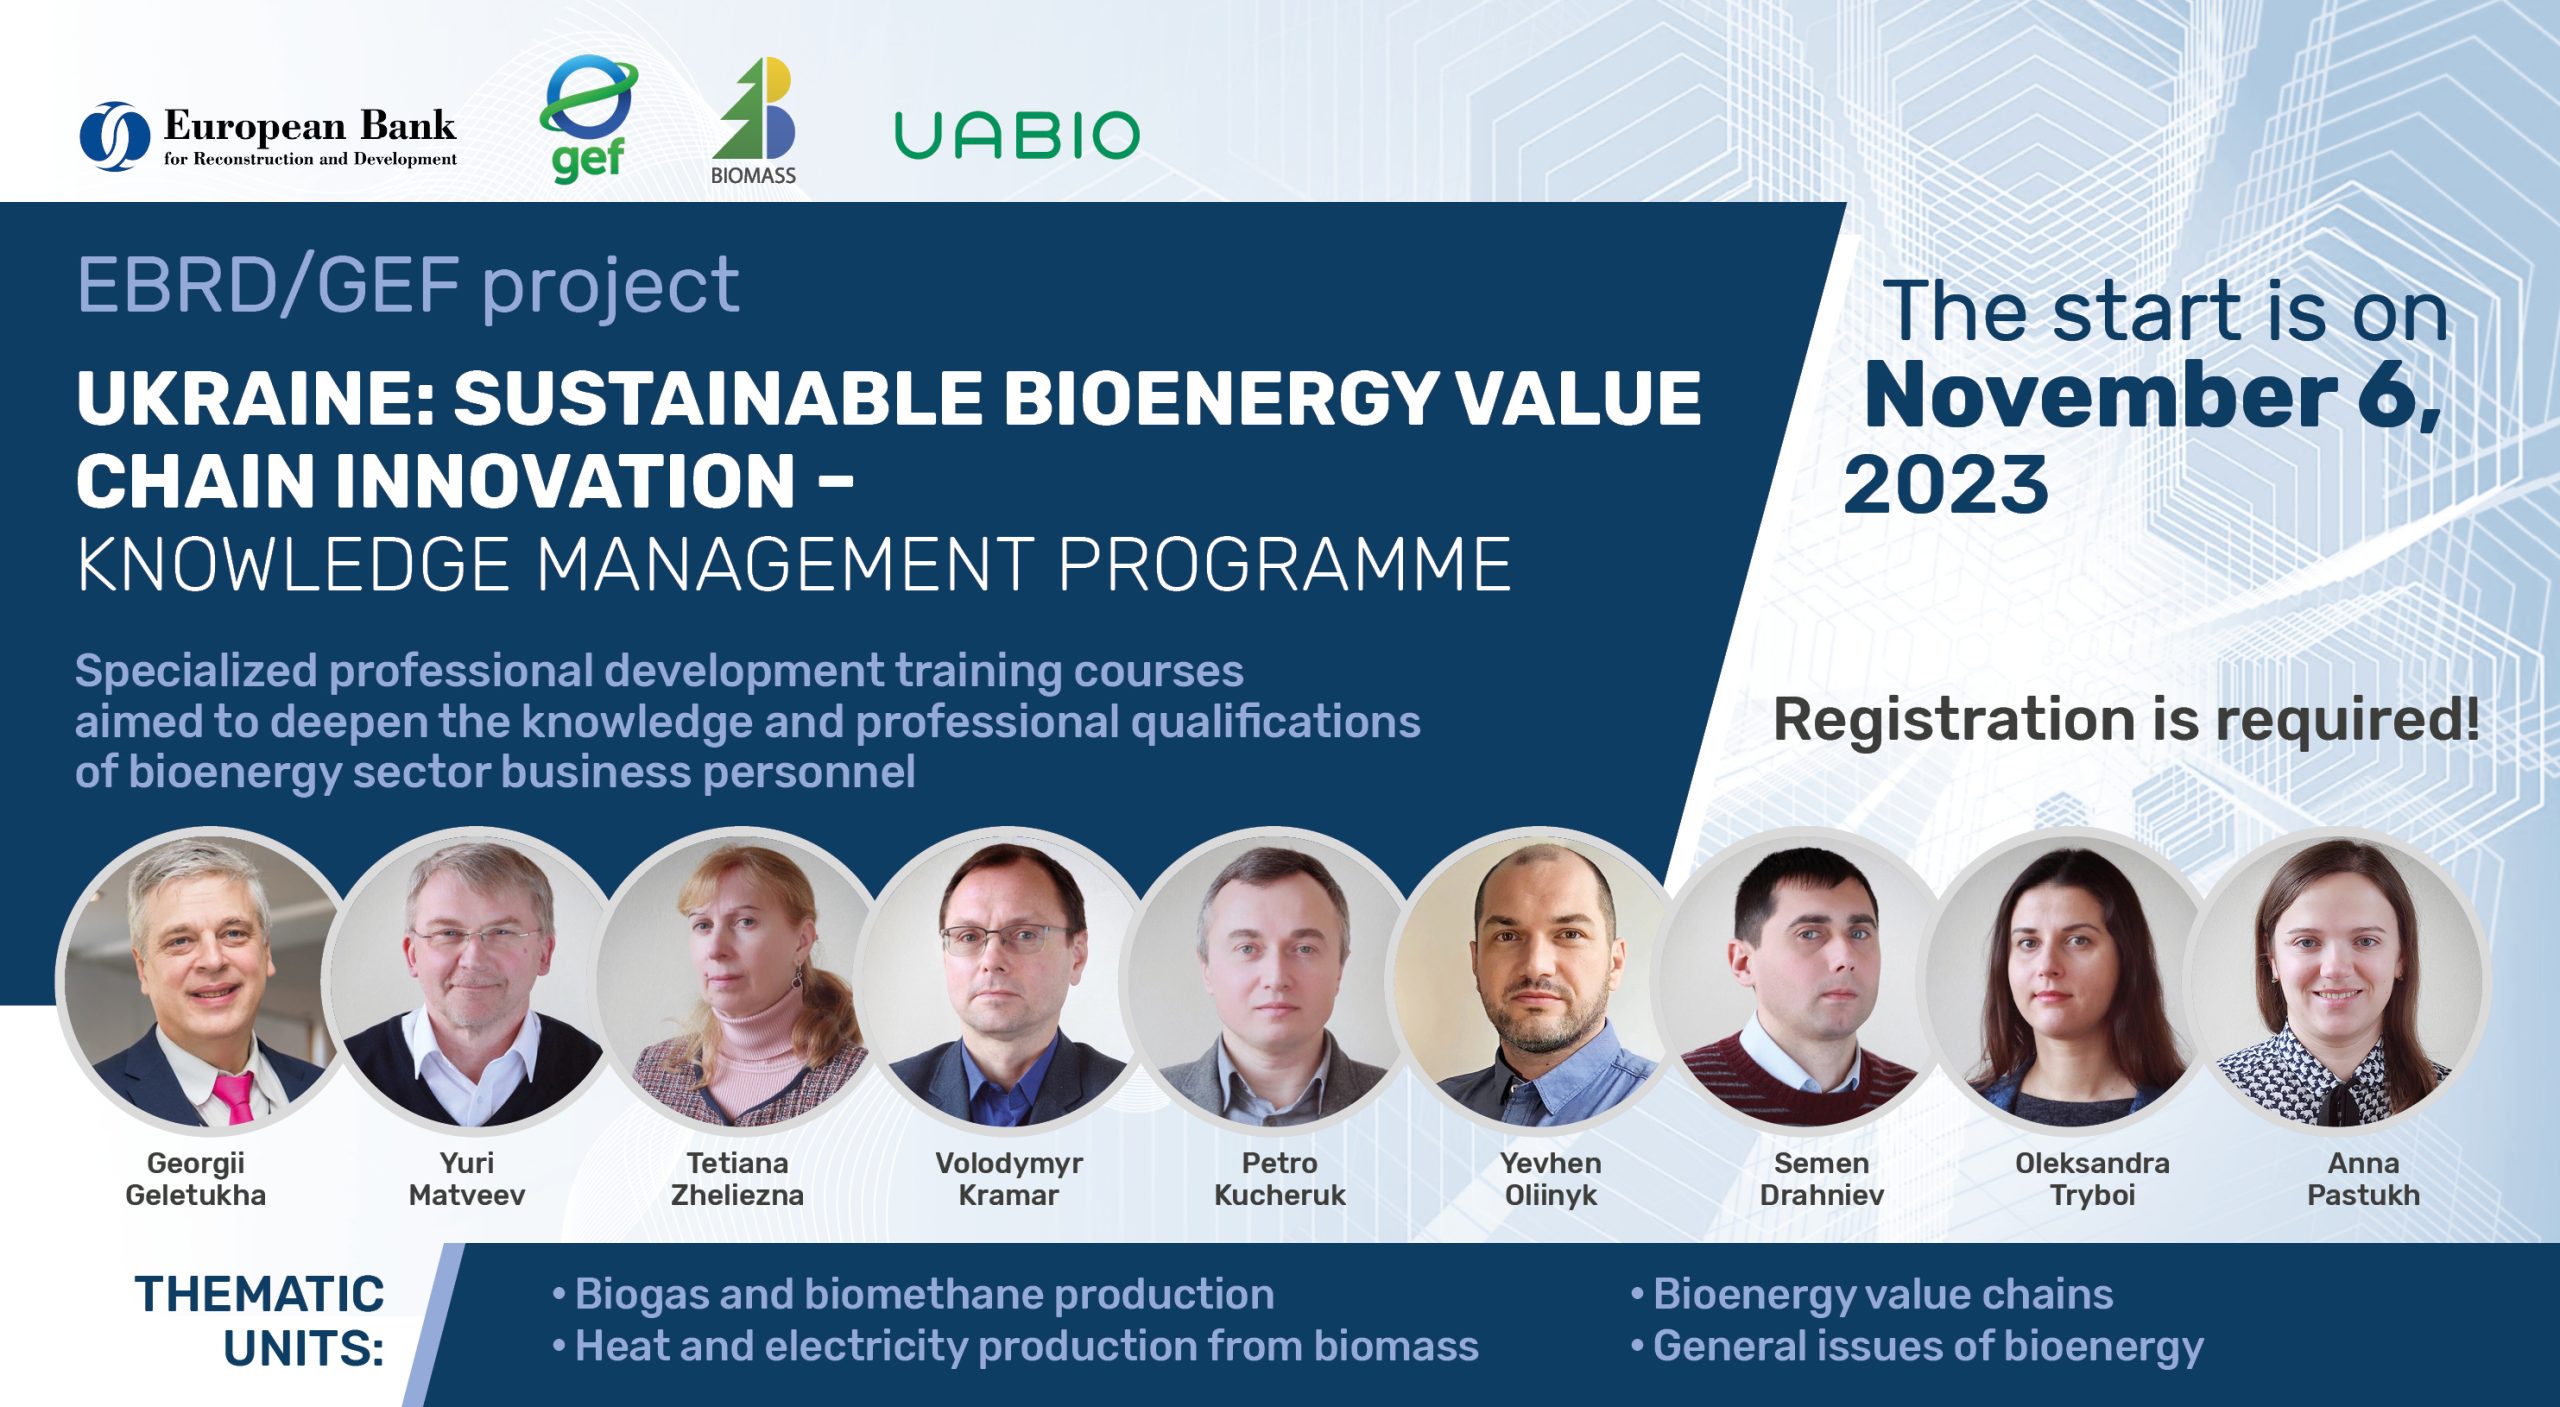  training courses on improving the skills of personnel in the bioenergy sector 